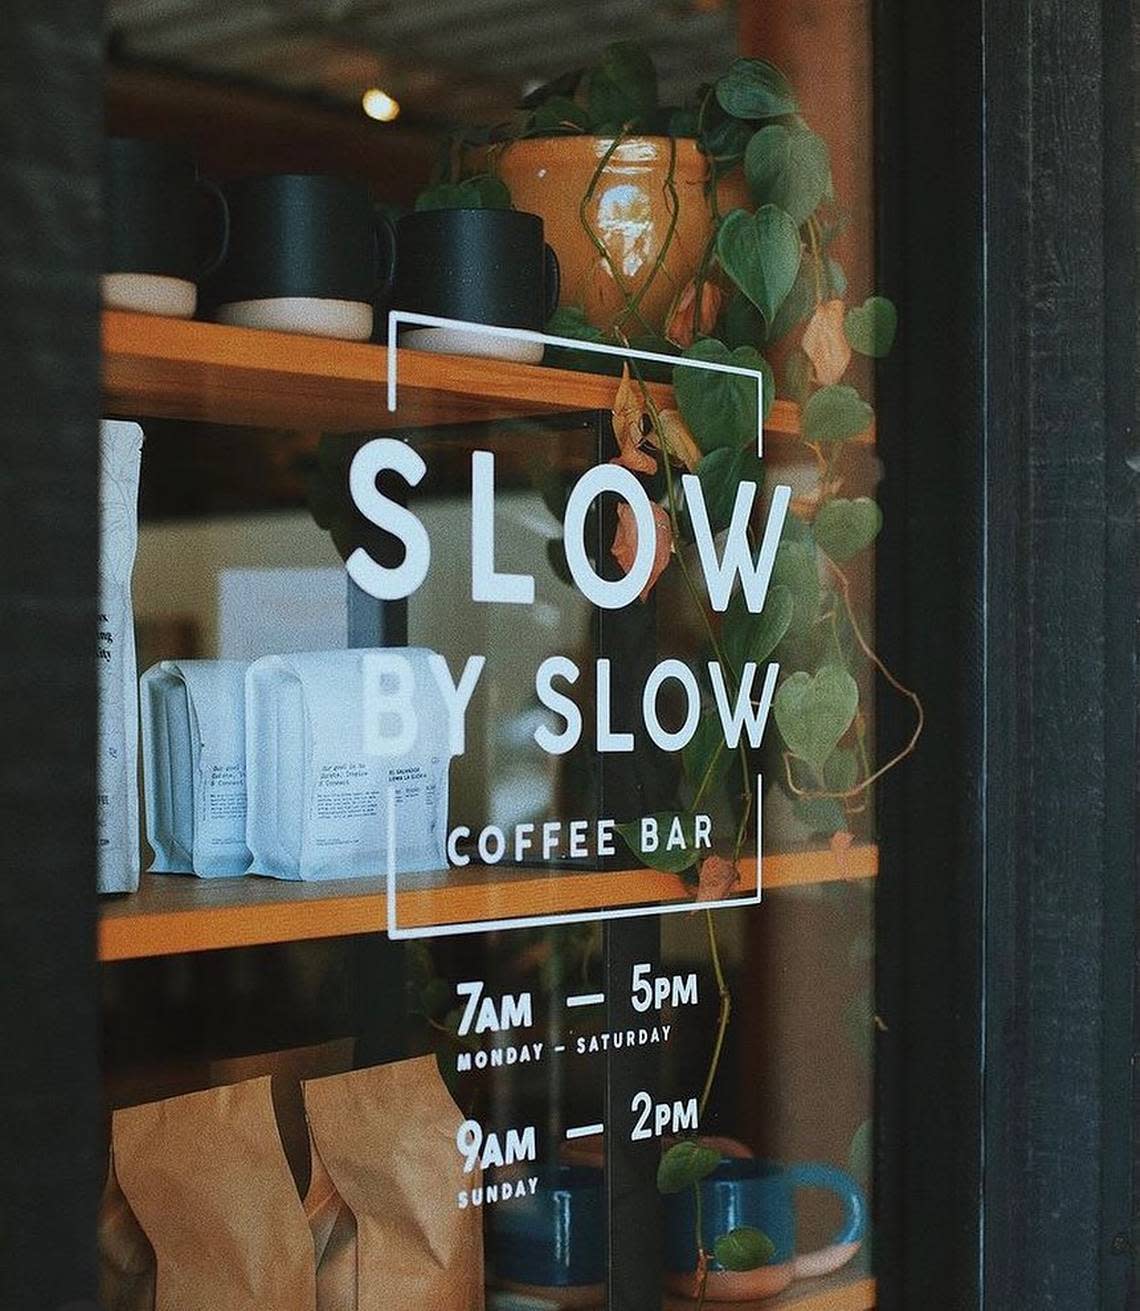 Slow by Slow Coffee Bar opened in 2016 in downtown Boise.